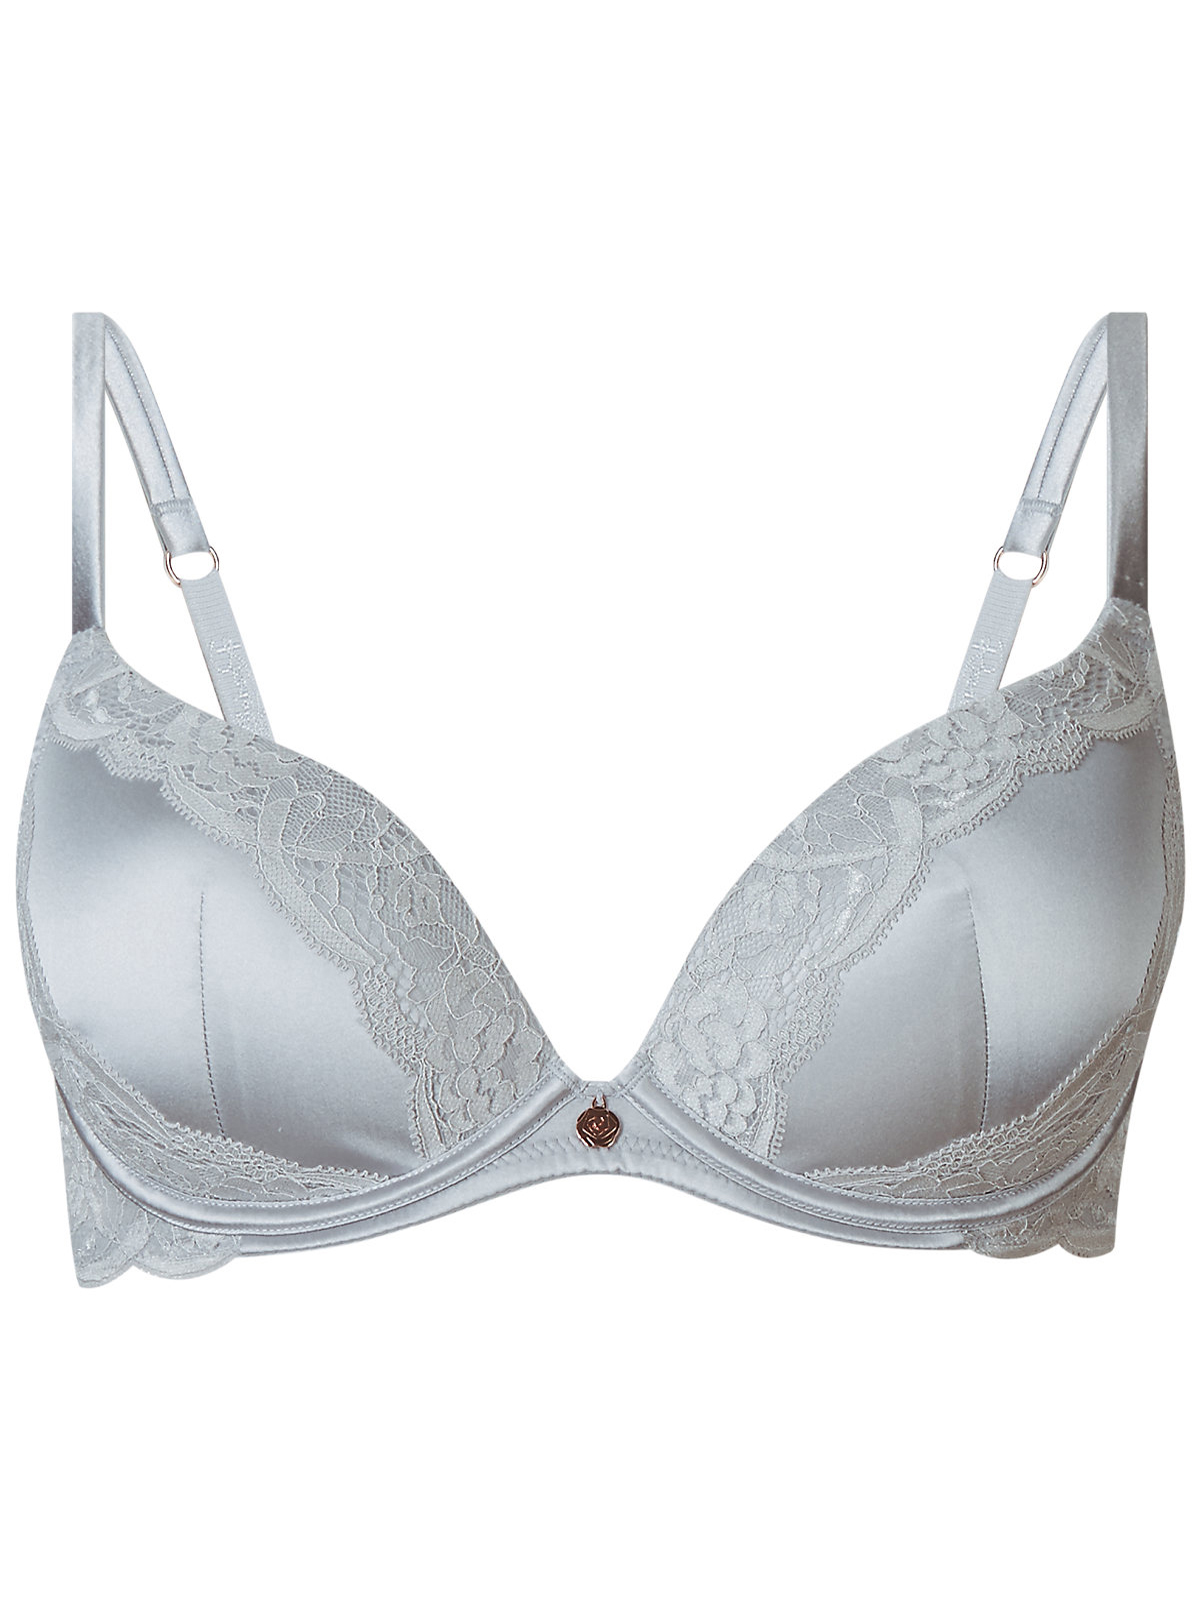 Marks and Spencer - - M&5 ASSORTED Plain & Lace Panelled Bras - Size 34 ...